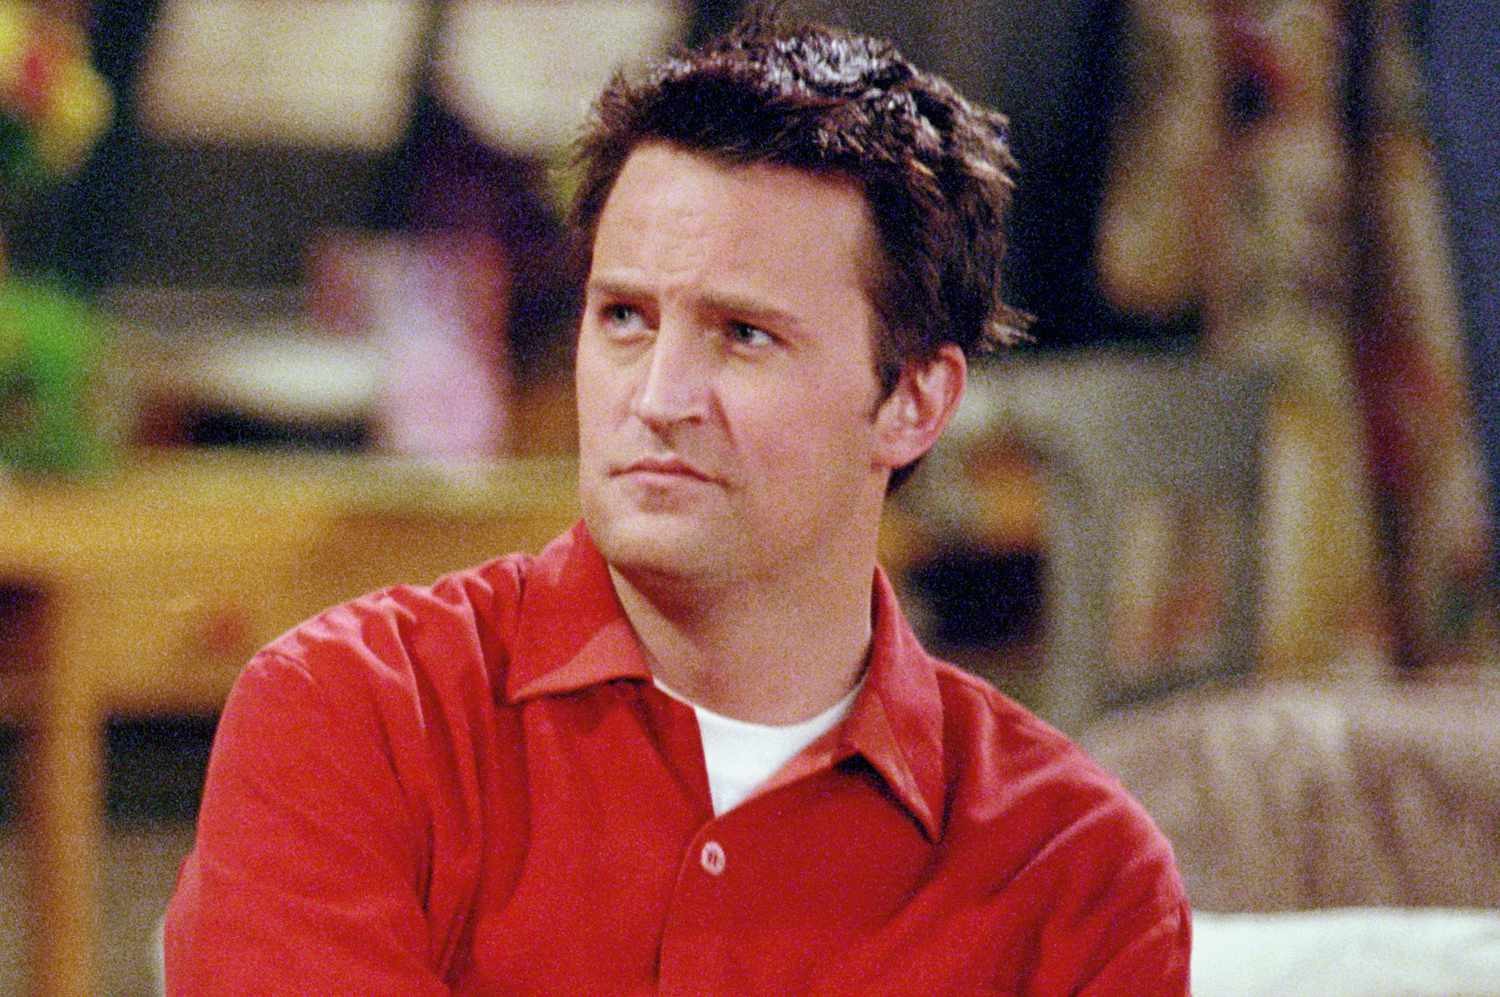 Matthew Perry as Chandler Bing in a still from F.R.I.E.N.D.S.